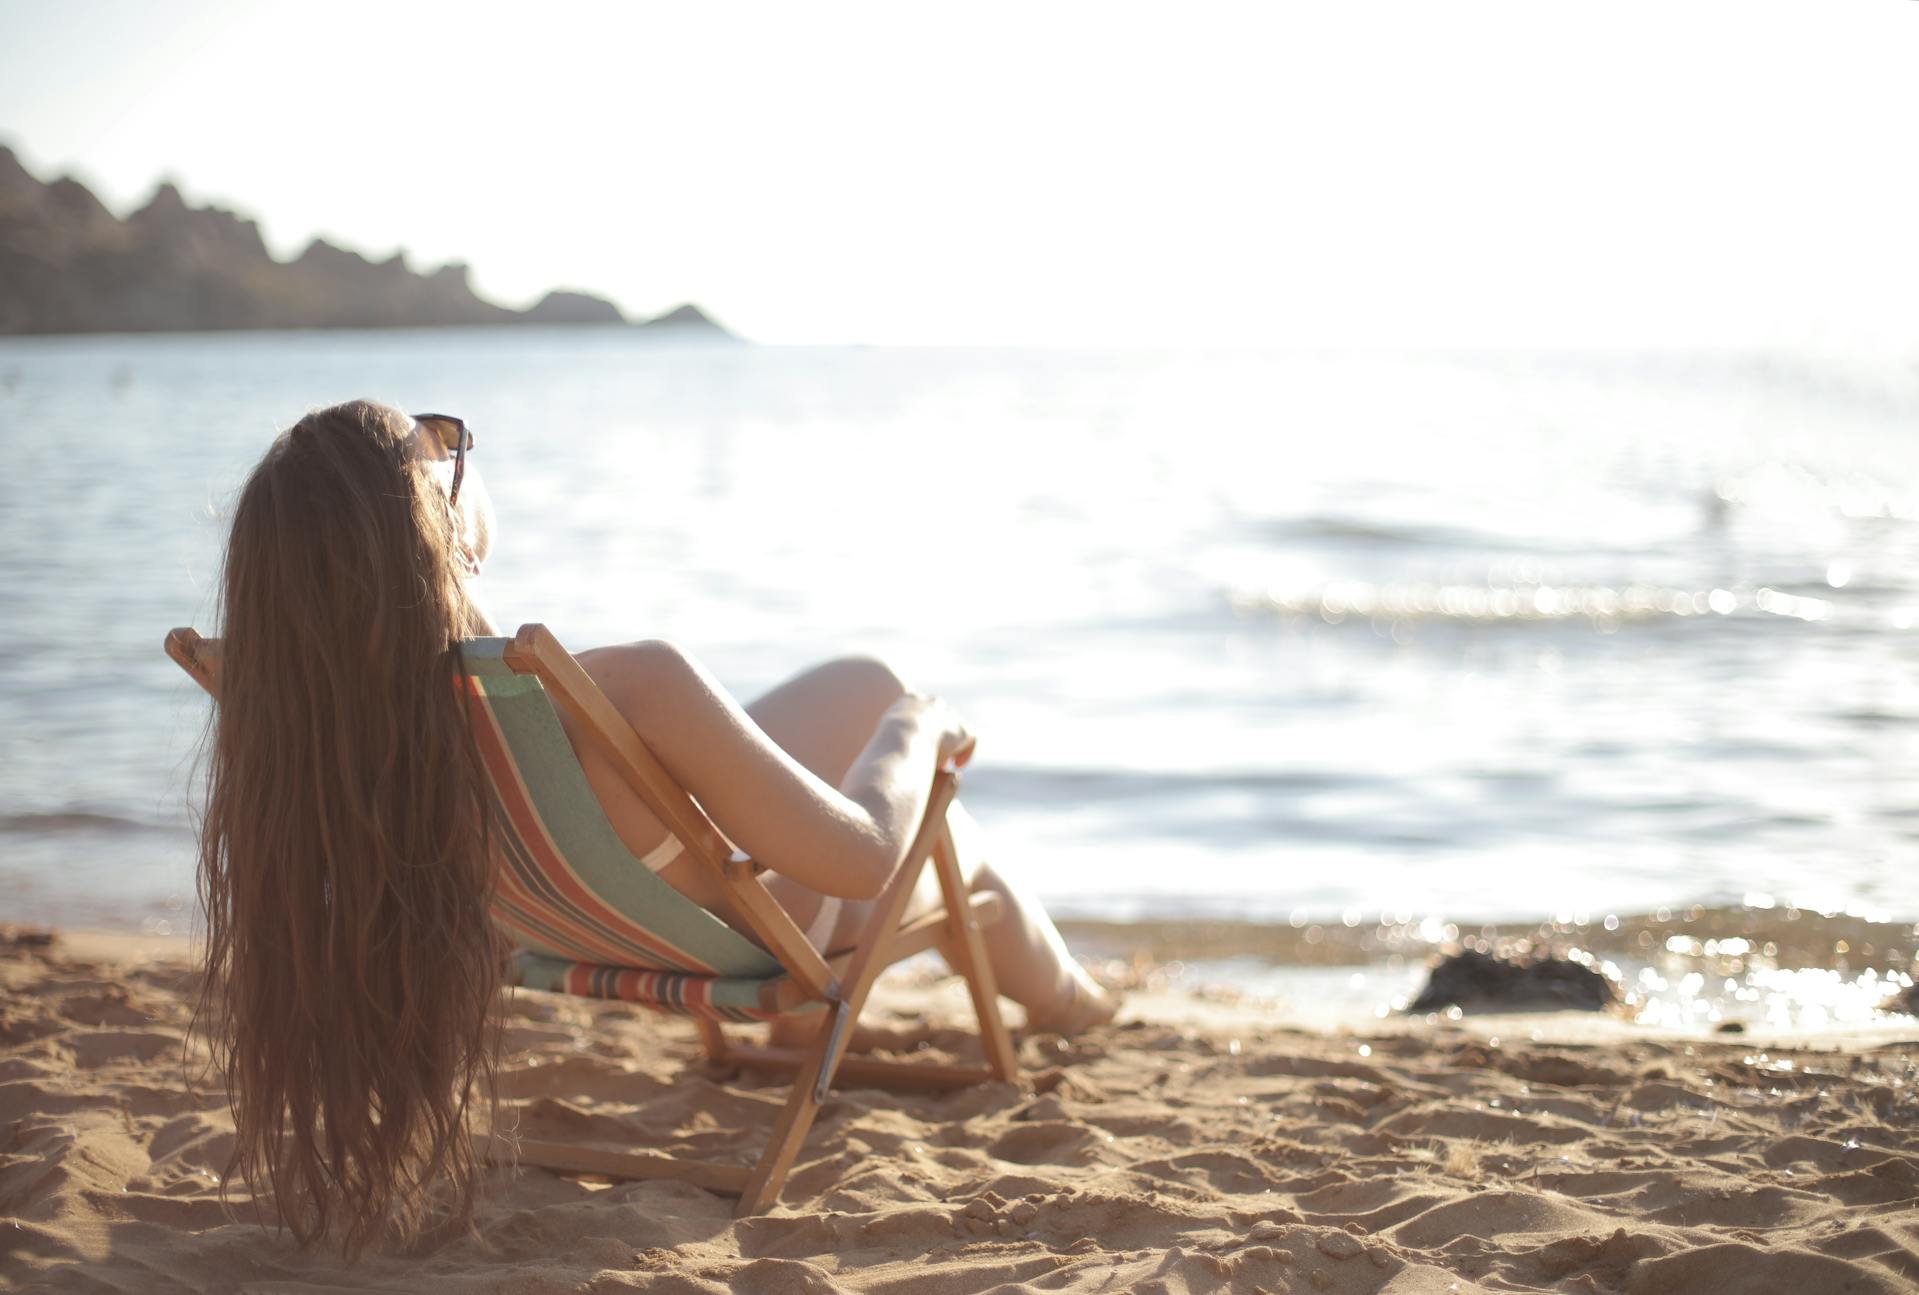 A woman in a swimsuit reclining in a beach chair | Source: Pexels